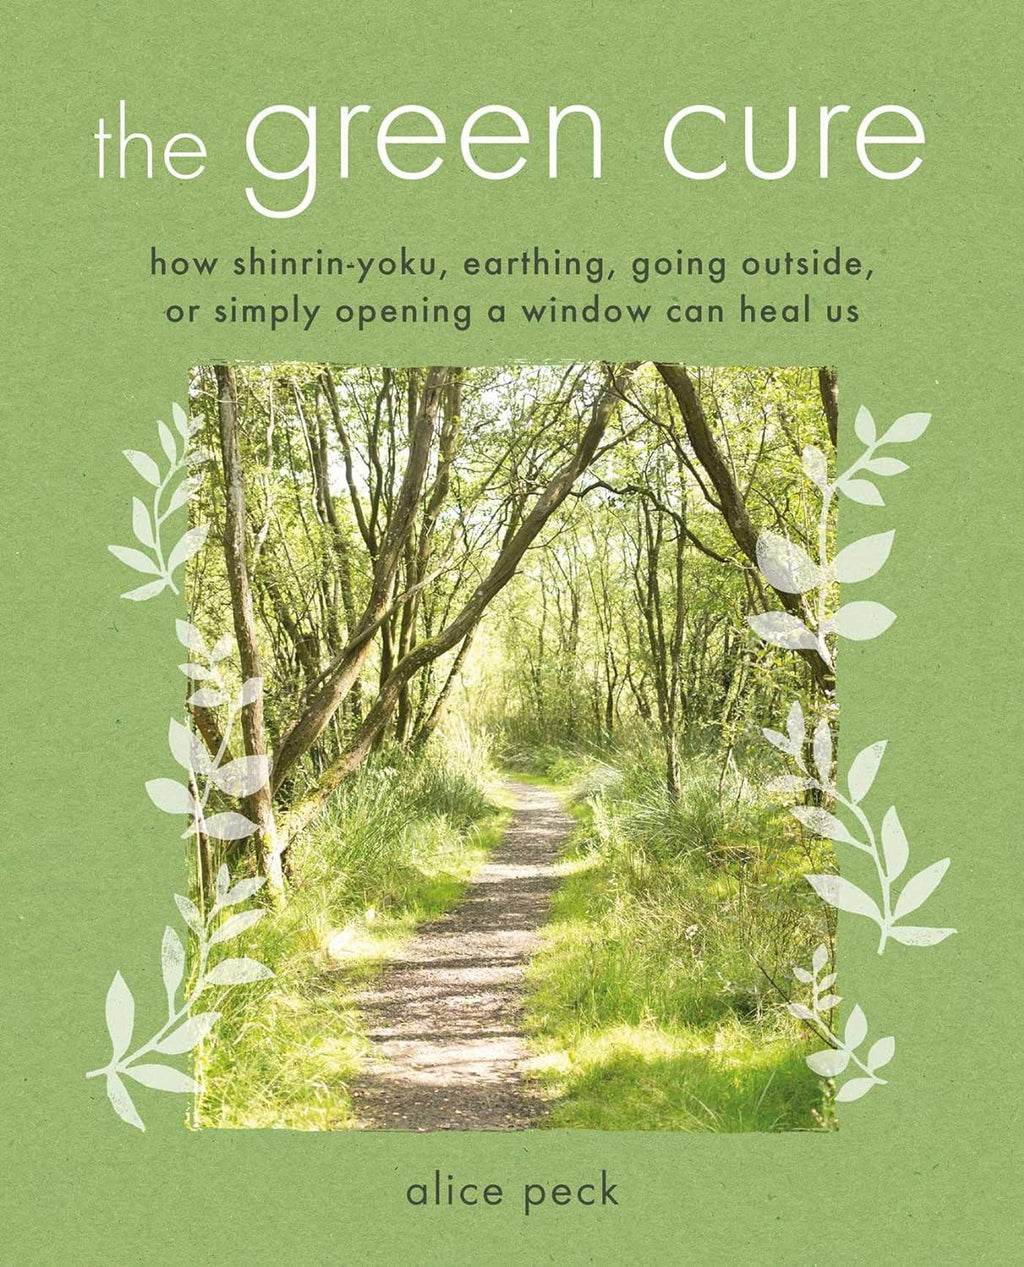 The Green Cure: How shinrin-yoku, earthing, going outside, or simply opening a window can heal us